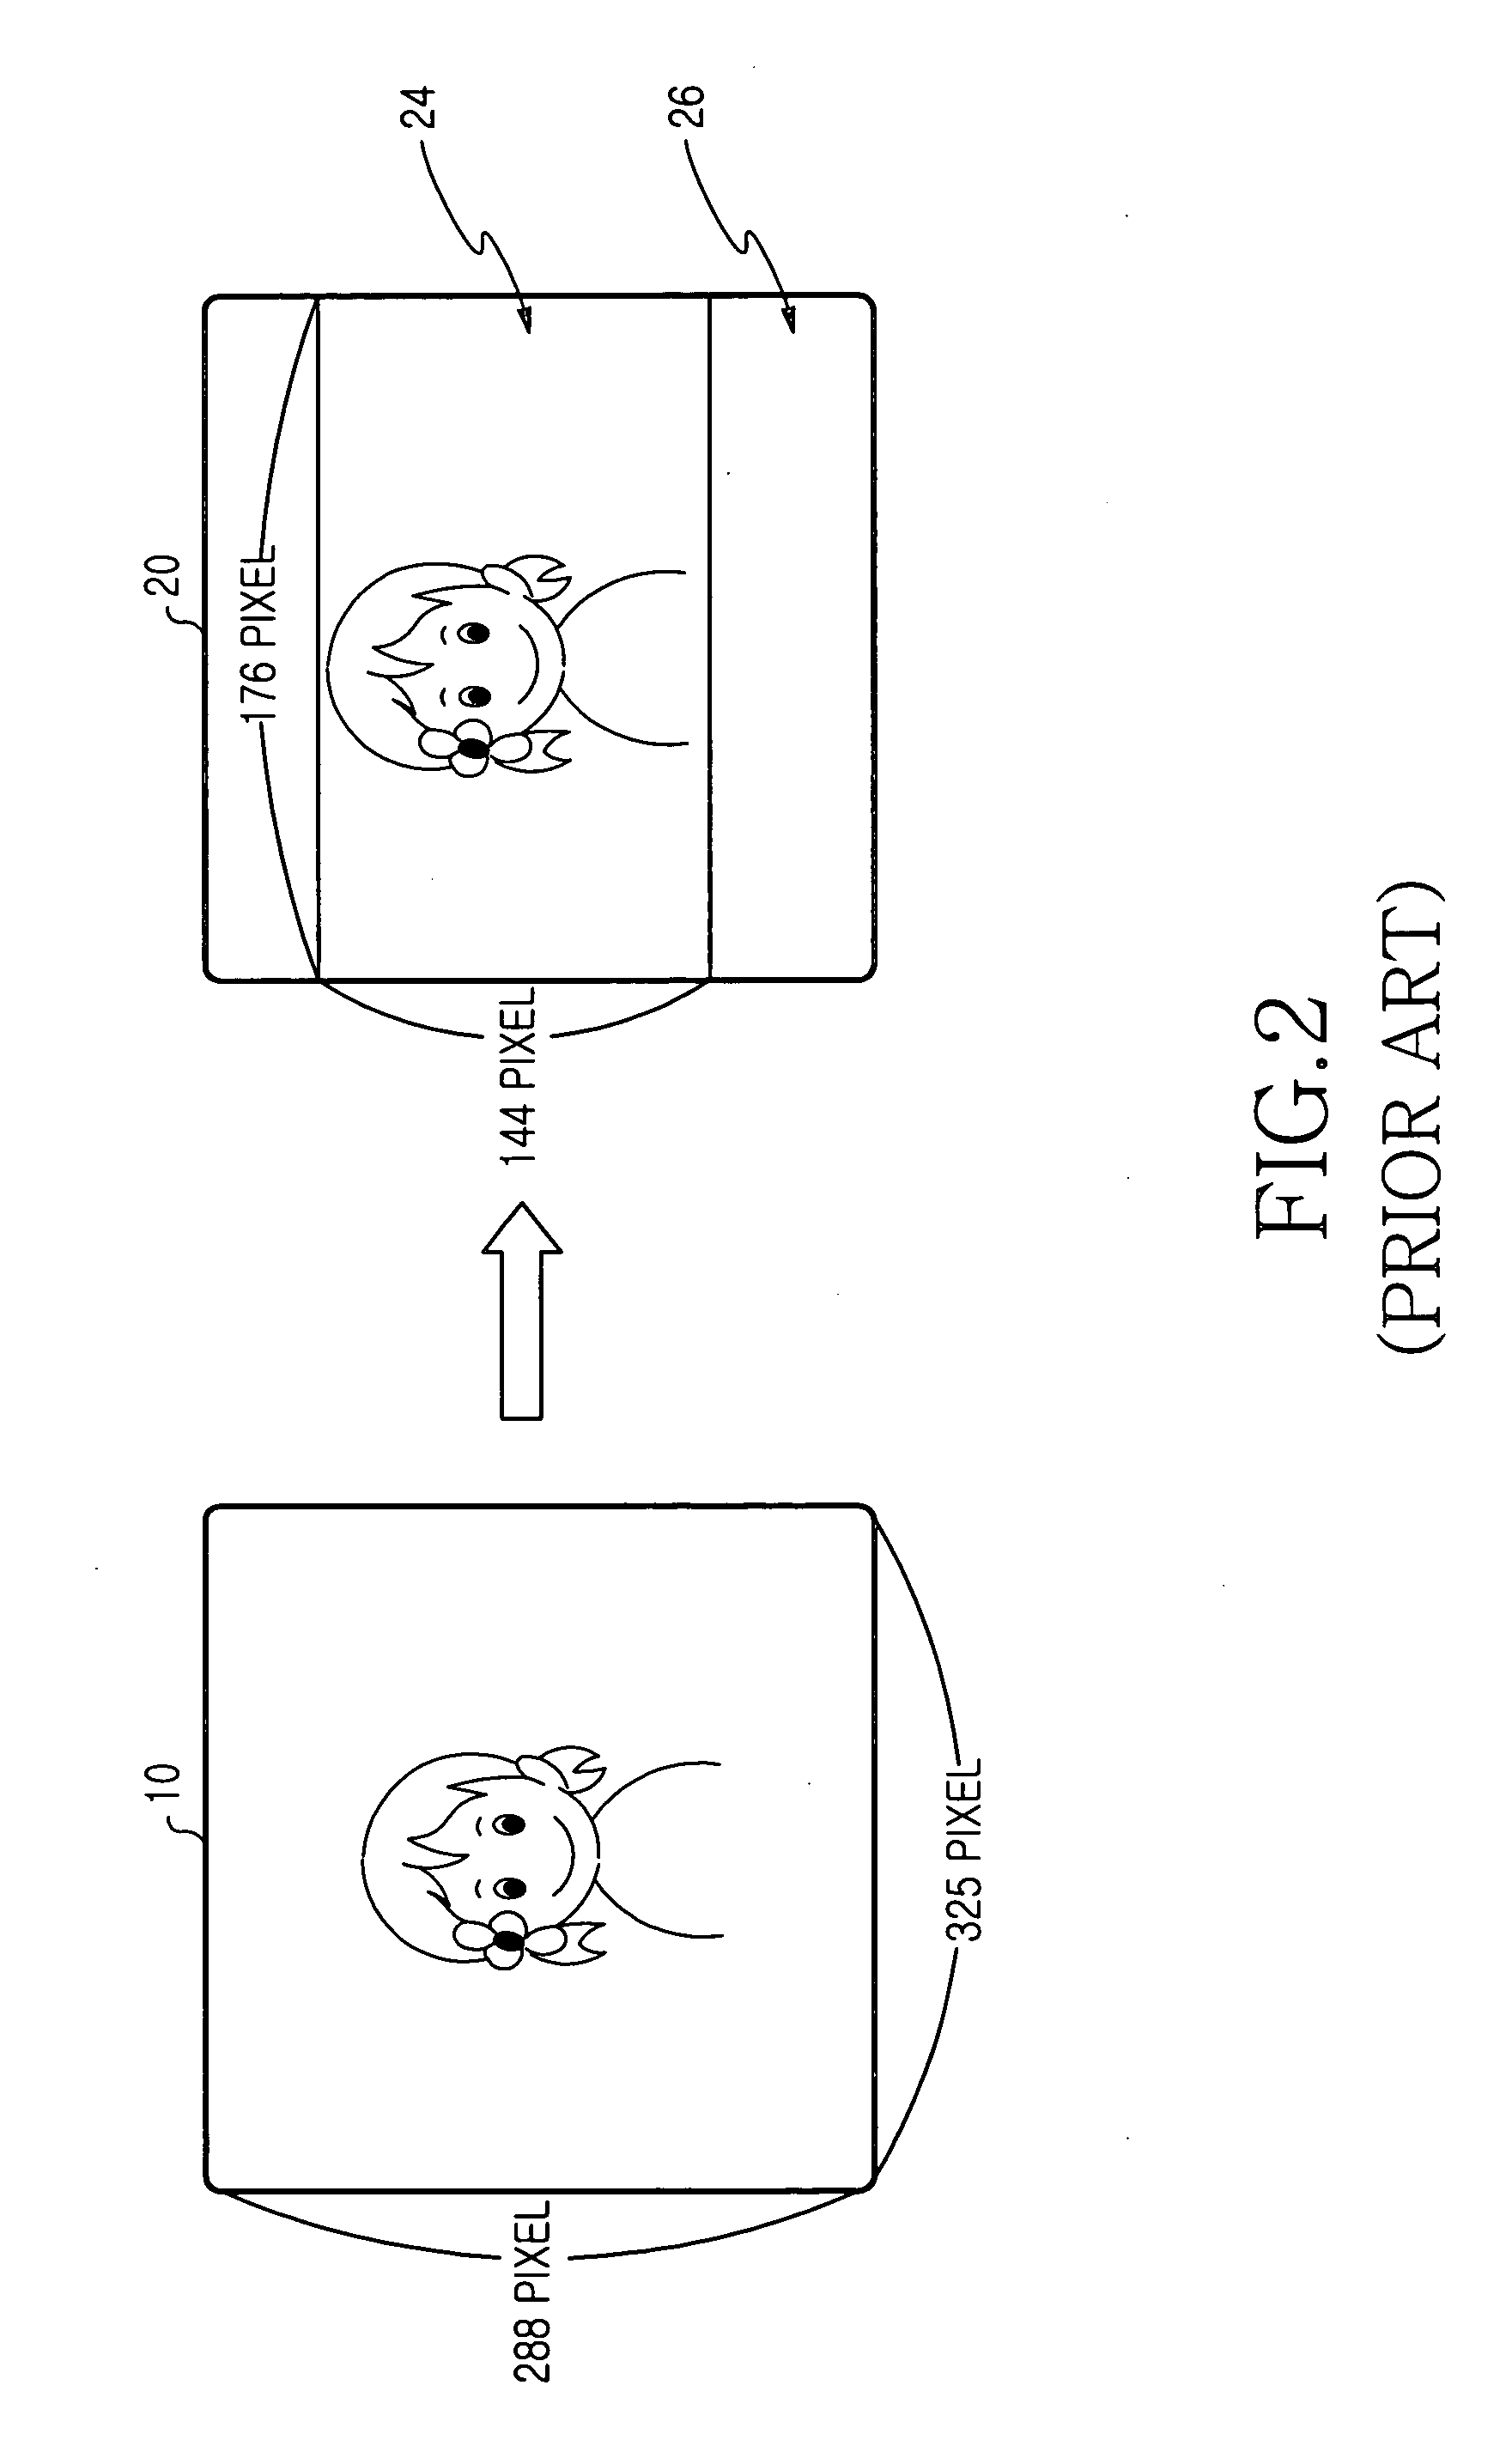 Mobile terminal capable of editing images and image editing method using same